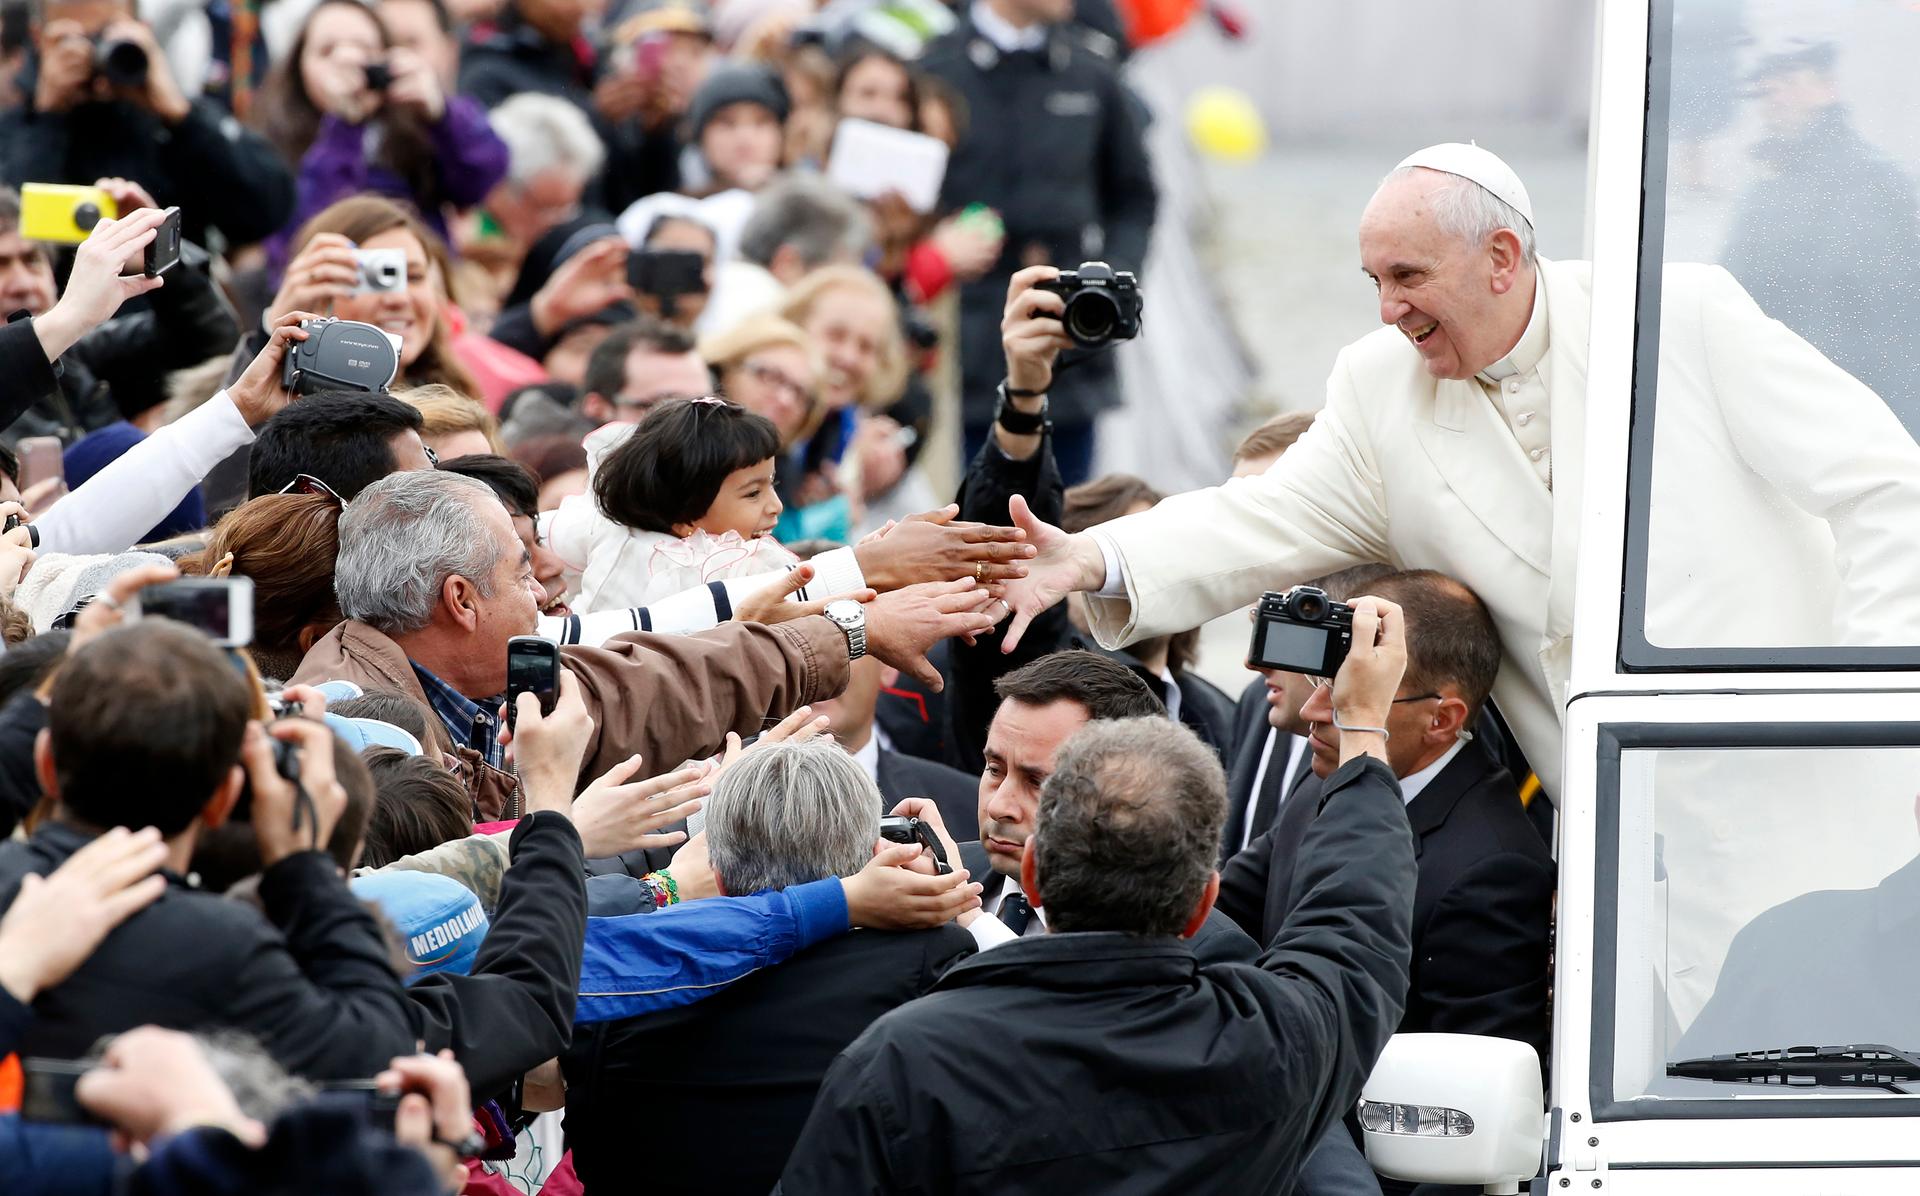 Pope Francis reaches out to greet the faithful in Saint Peter's Square at the Vatican on March 26, 2014.